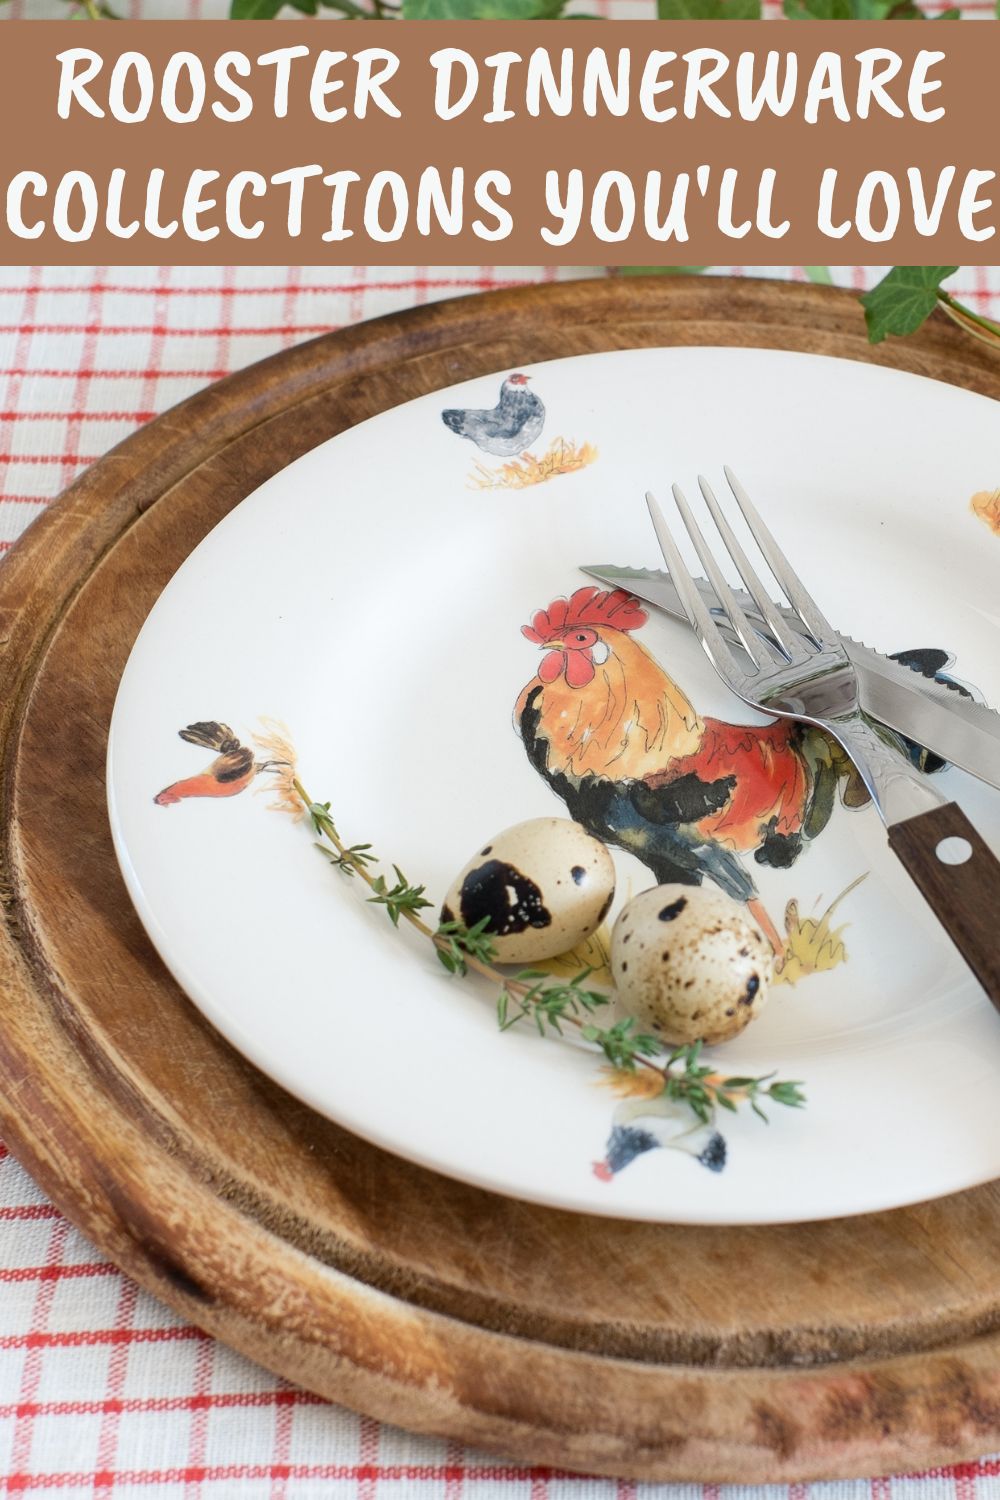 Rooster dinnerware collections you'll love. 